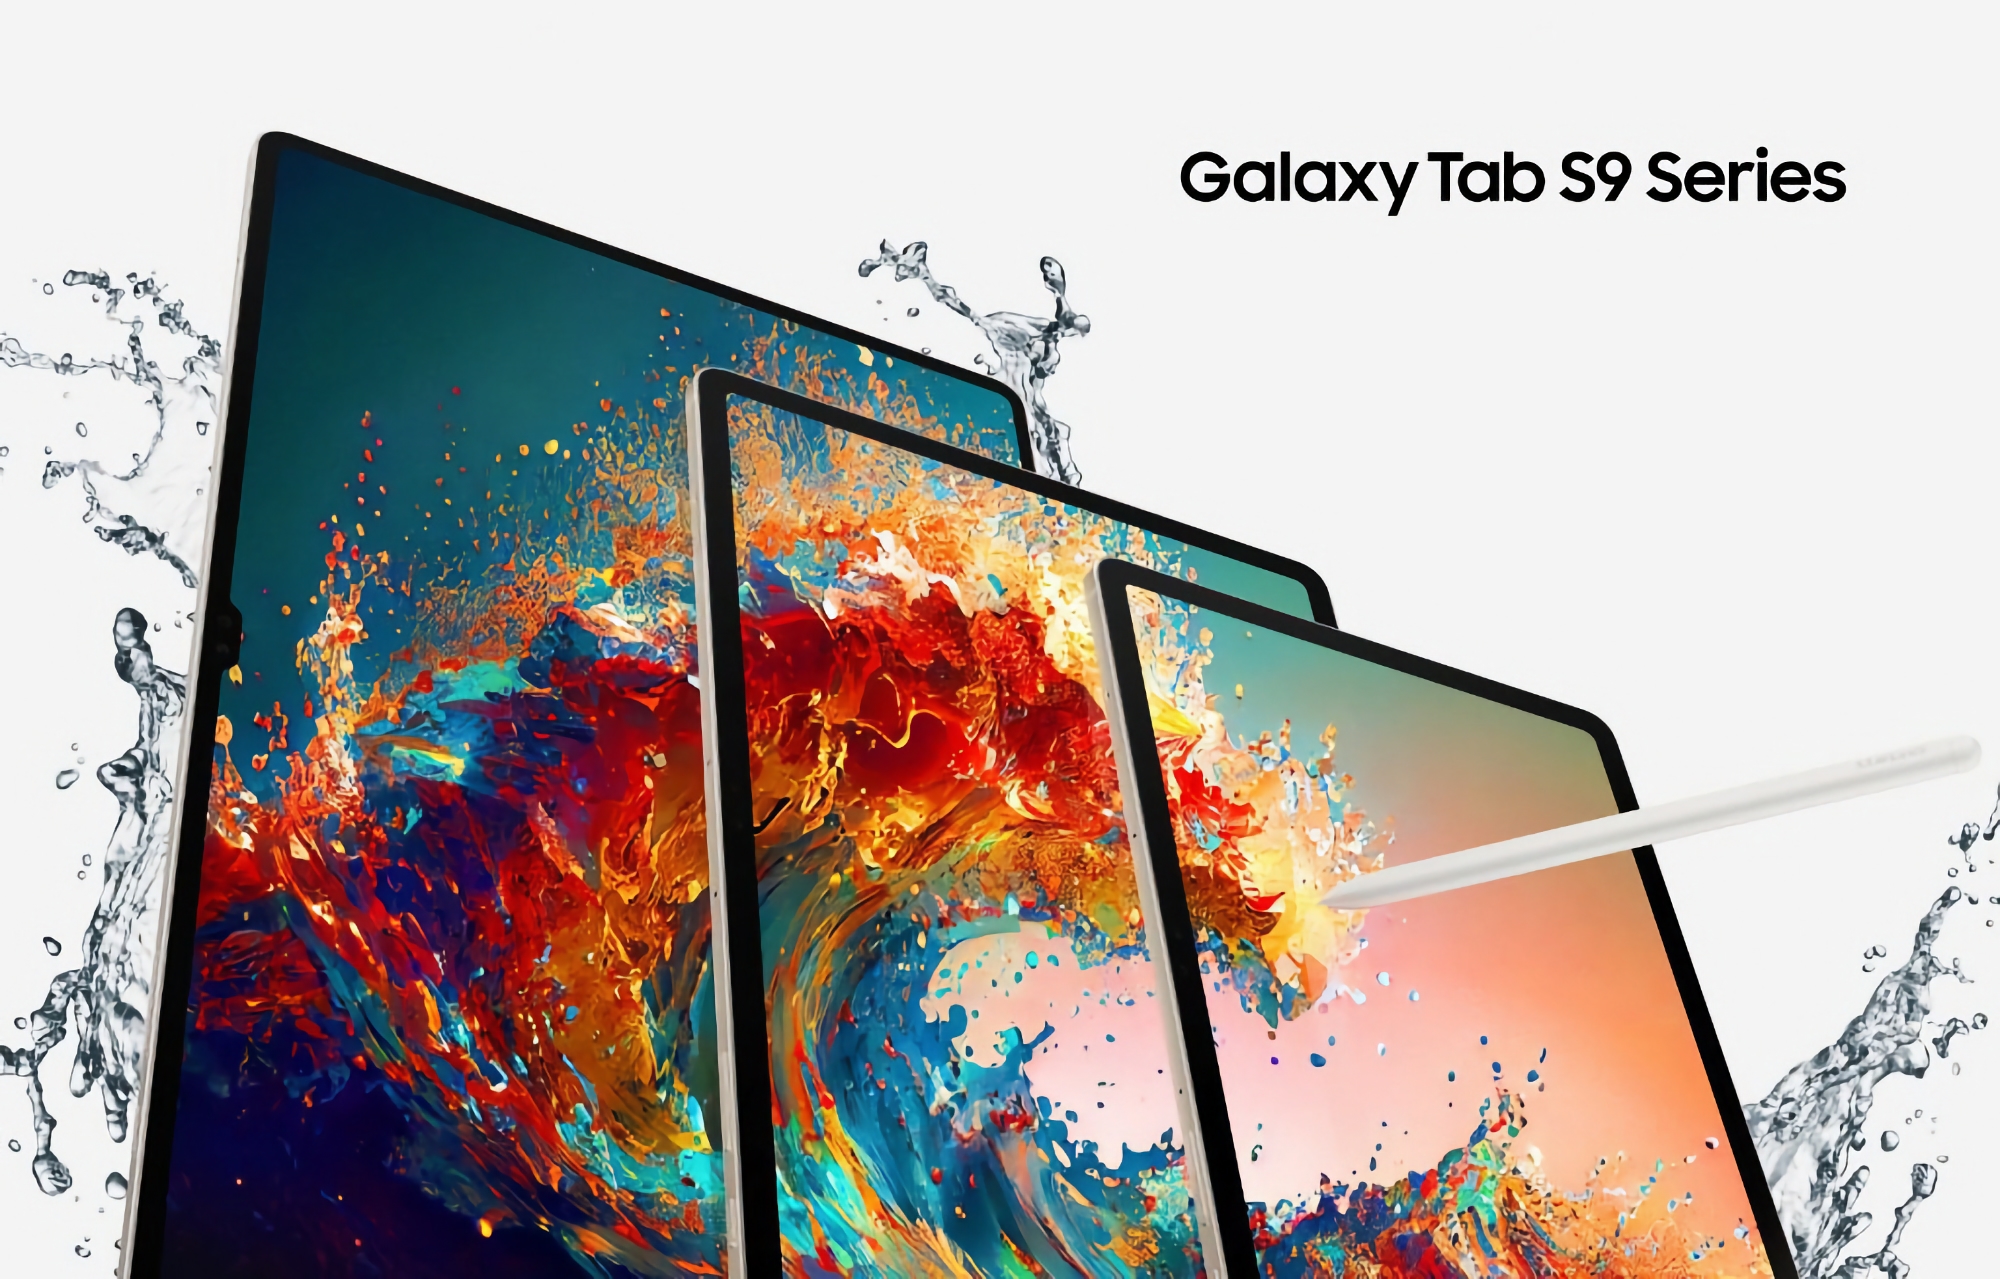 Limited time deal: Samsung Galaxy Tab S9+ with 512GB storage is available on Amazon at a discounted price of $223